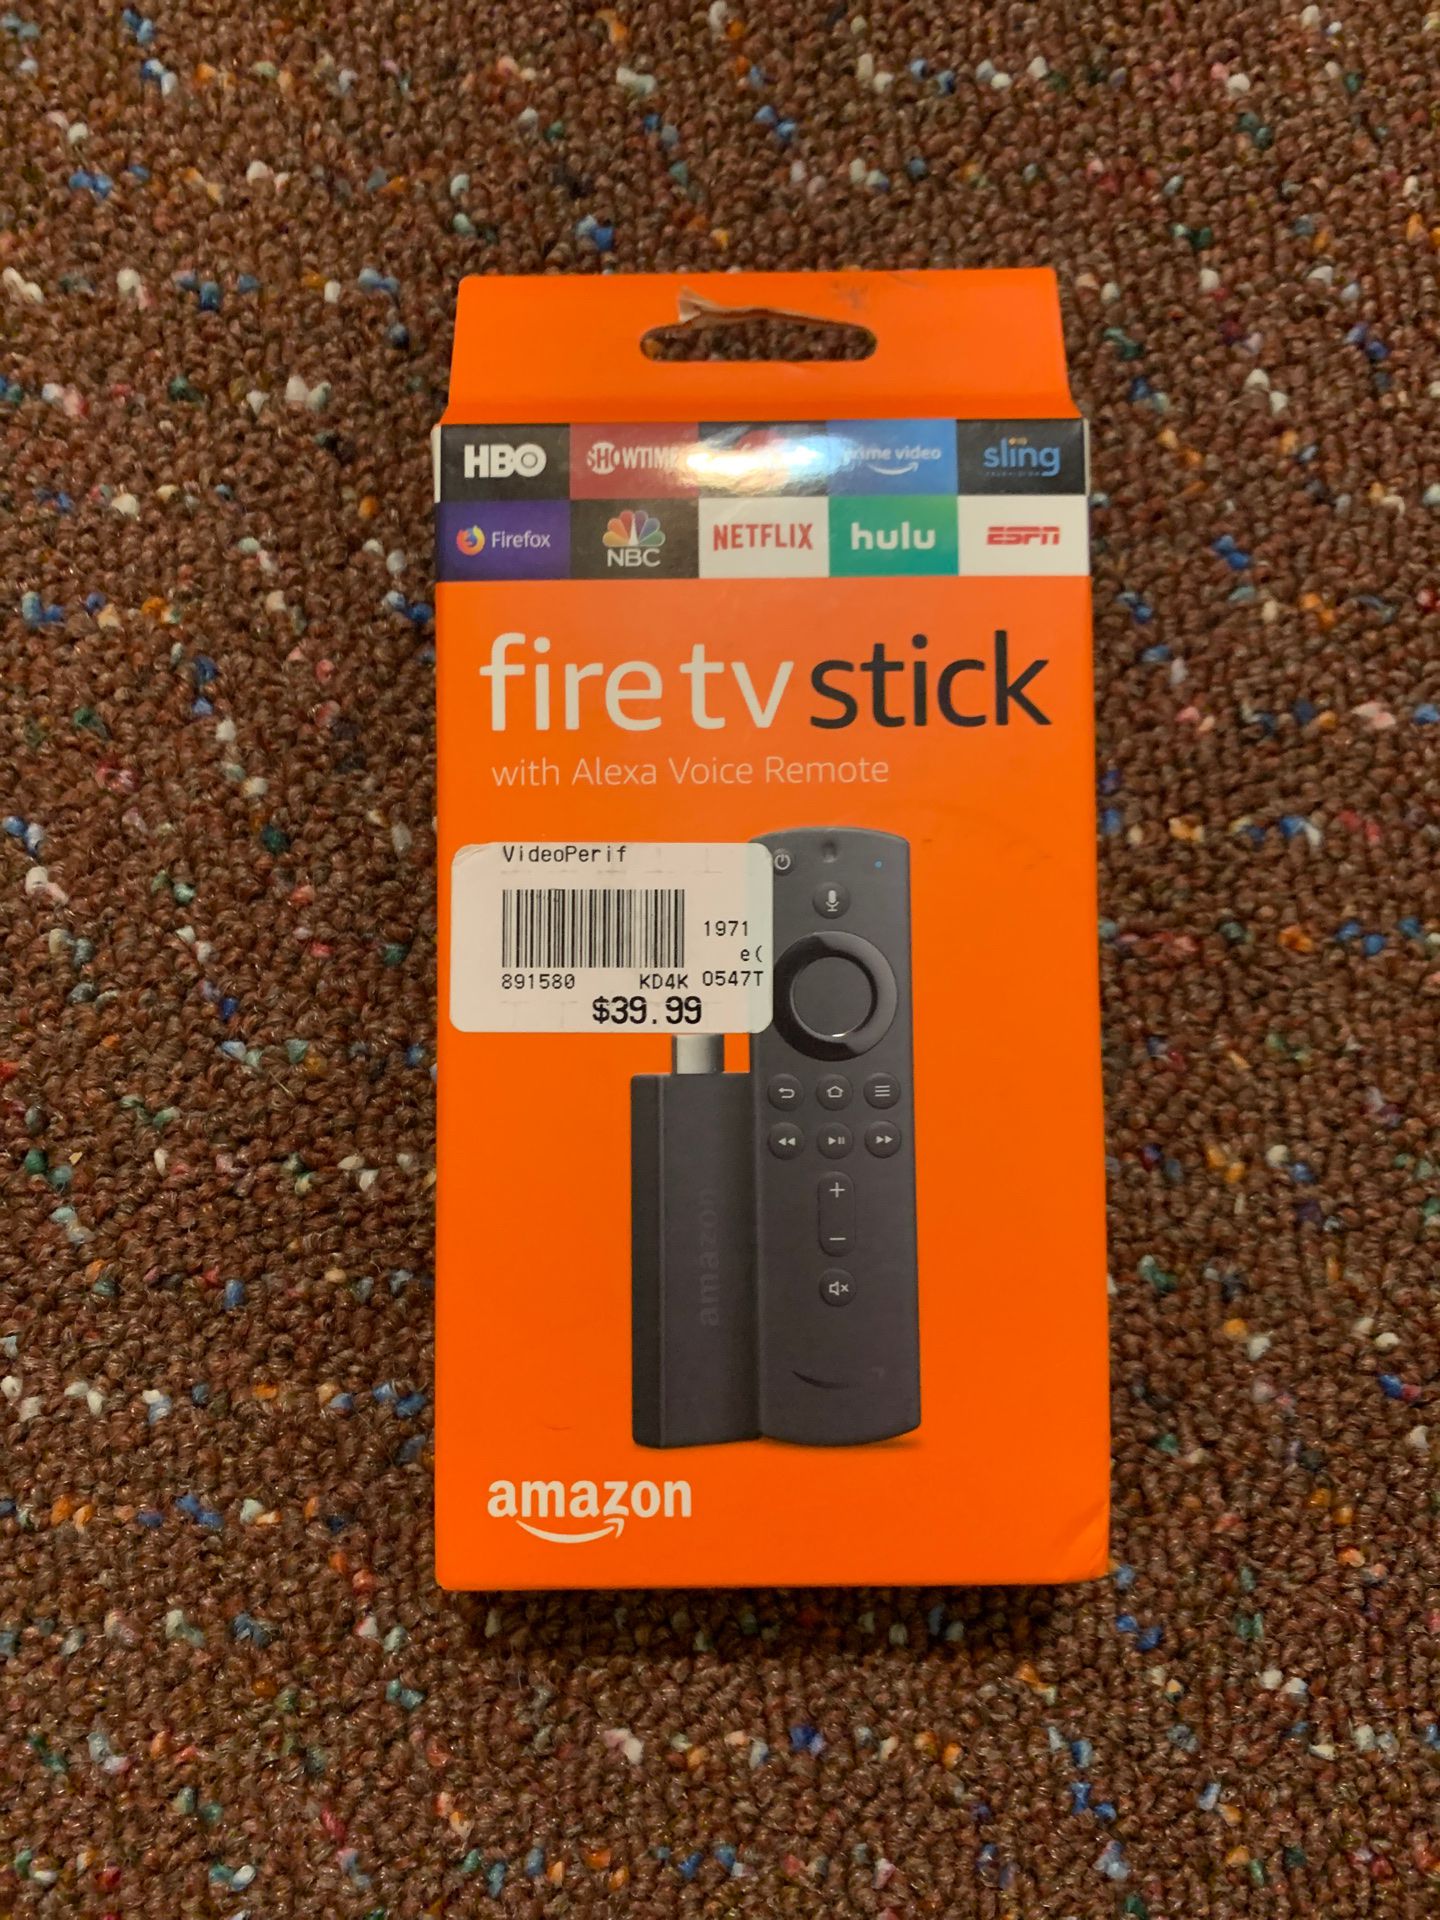 Amazon Fire Tv Stick with Alexa Voice Remote (never opened)